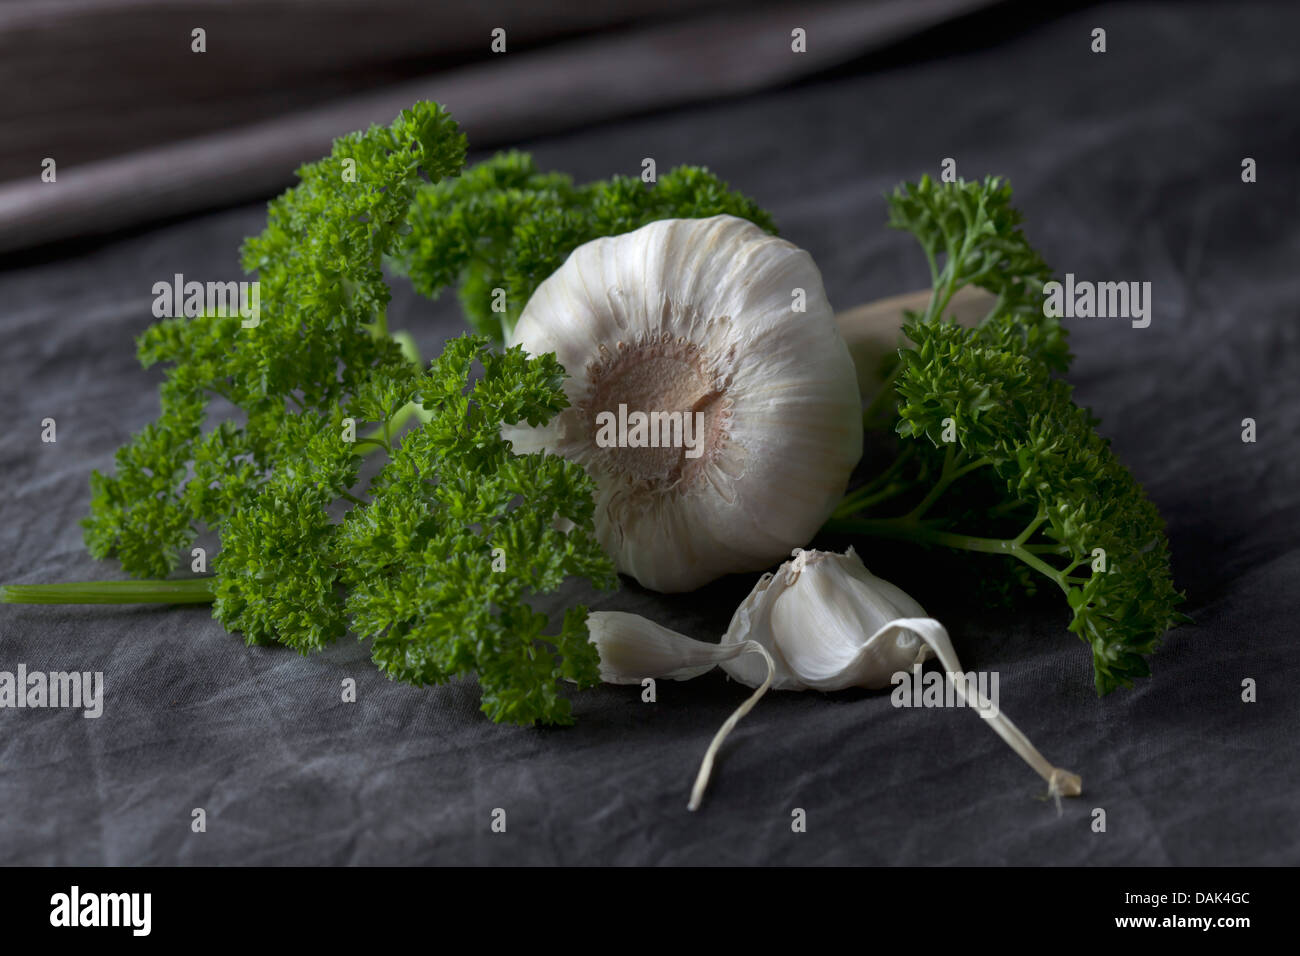 Parsley and garlic bulbs on textile, close up Stock Photo